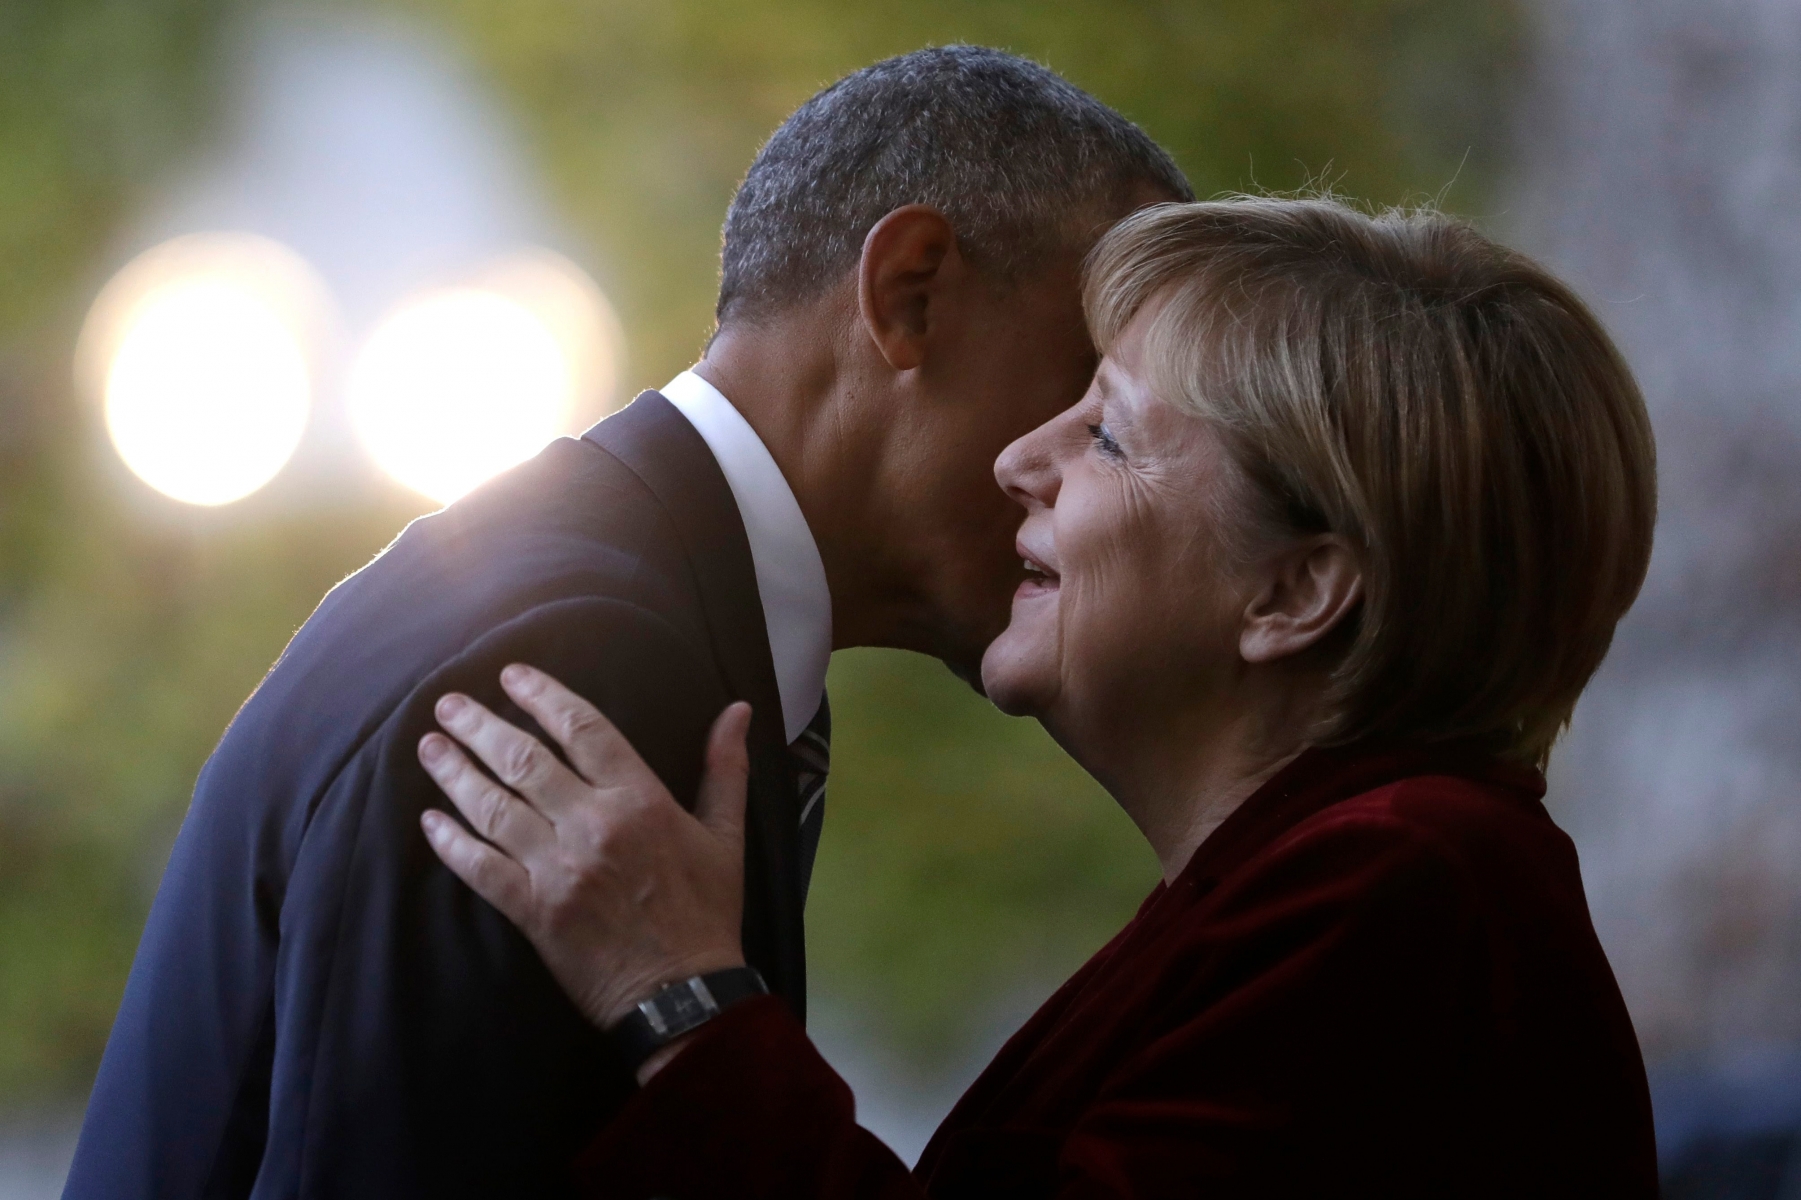 U.S. President Barack Obama, left, is welcomed by German Chancellor Angela Merkel prior to a meeting in the chancellery in Berlin, Germany, Thursday, Nov. 17, 2016. Germany is the last European stop of Obama's final tour abroad as U.S. president. (AP Photo/Michael Sohn) Germany US Obama